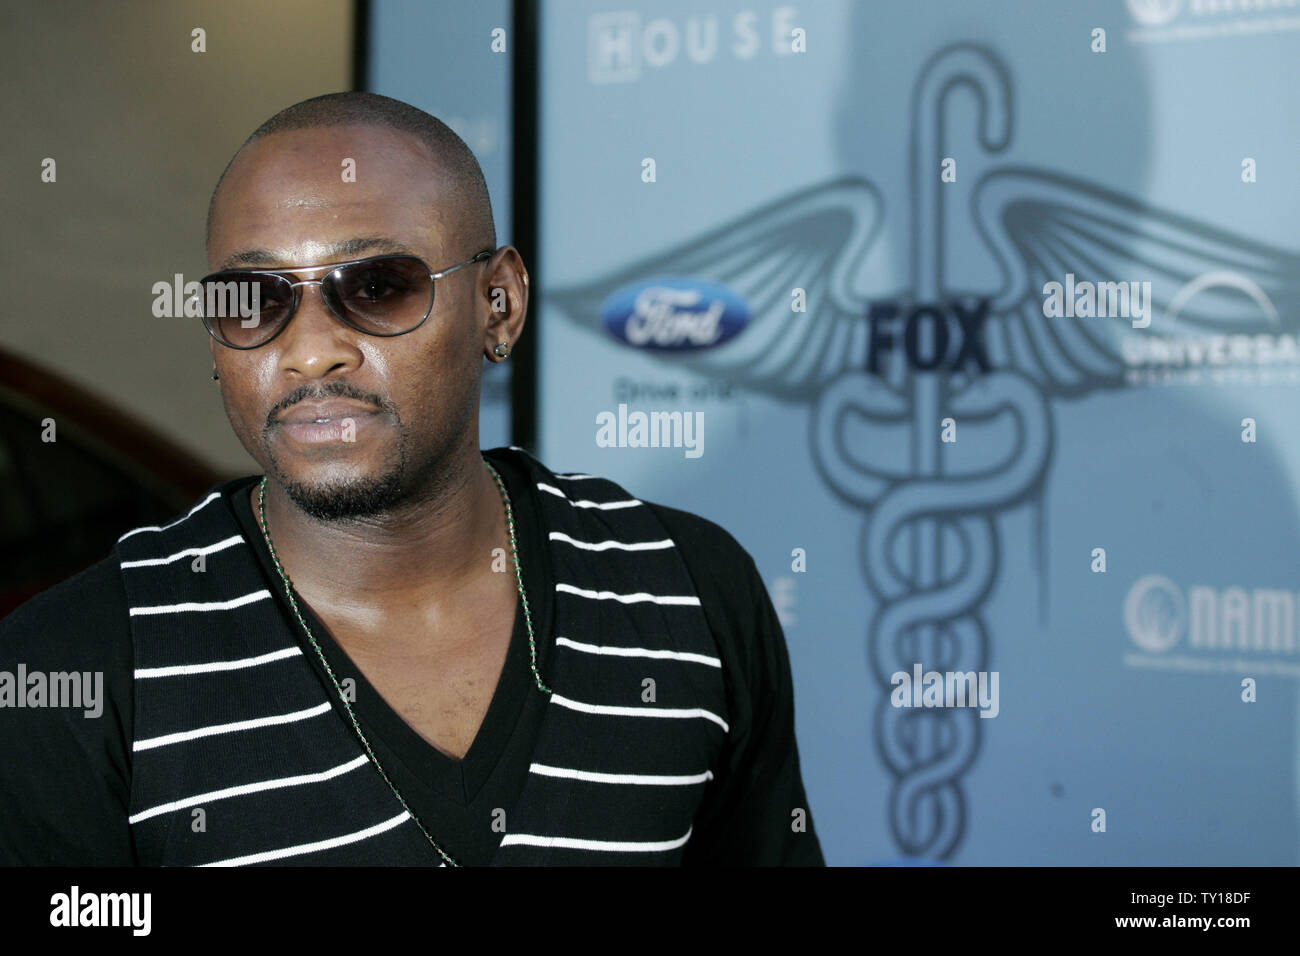 Actor Omar Epps arrives at the Season Six premiere for House at the Arclight Cinerama Dome in Hollywood, California on September 15, 2009.     UPI/Jonathan Alcorn Stock Photo